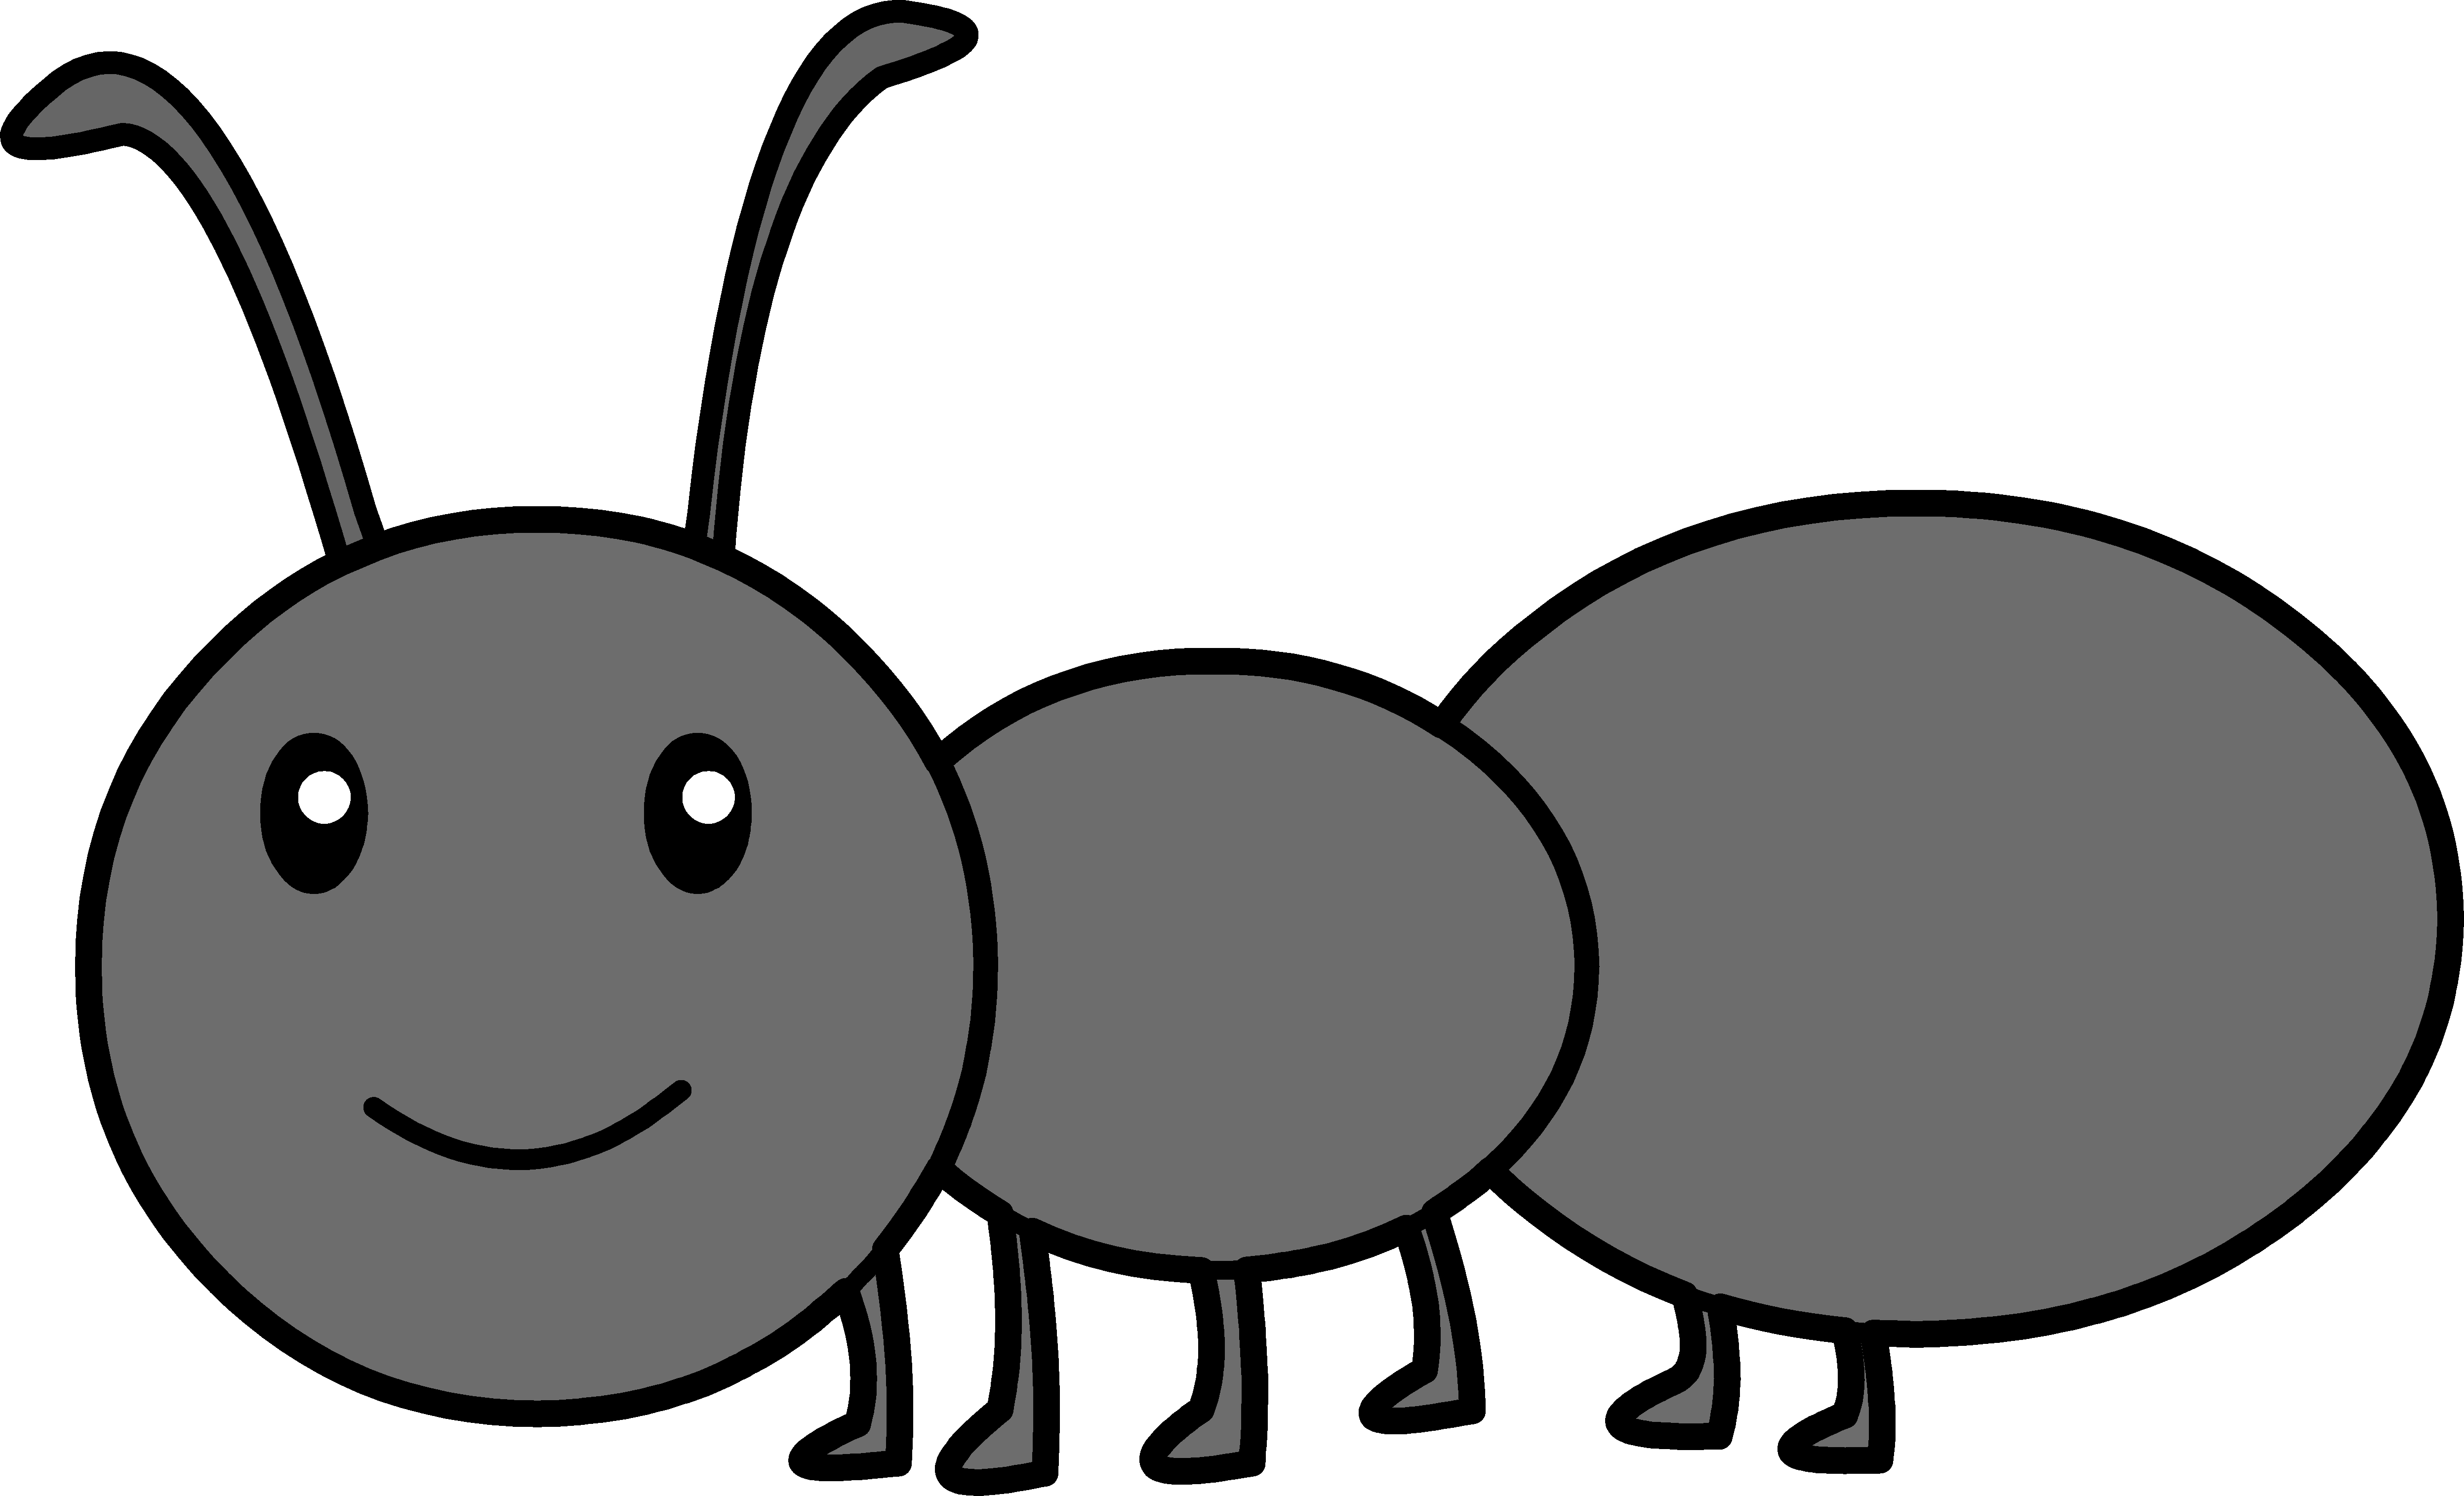 Insect clipart angry ant. Cute letters format black